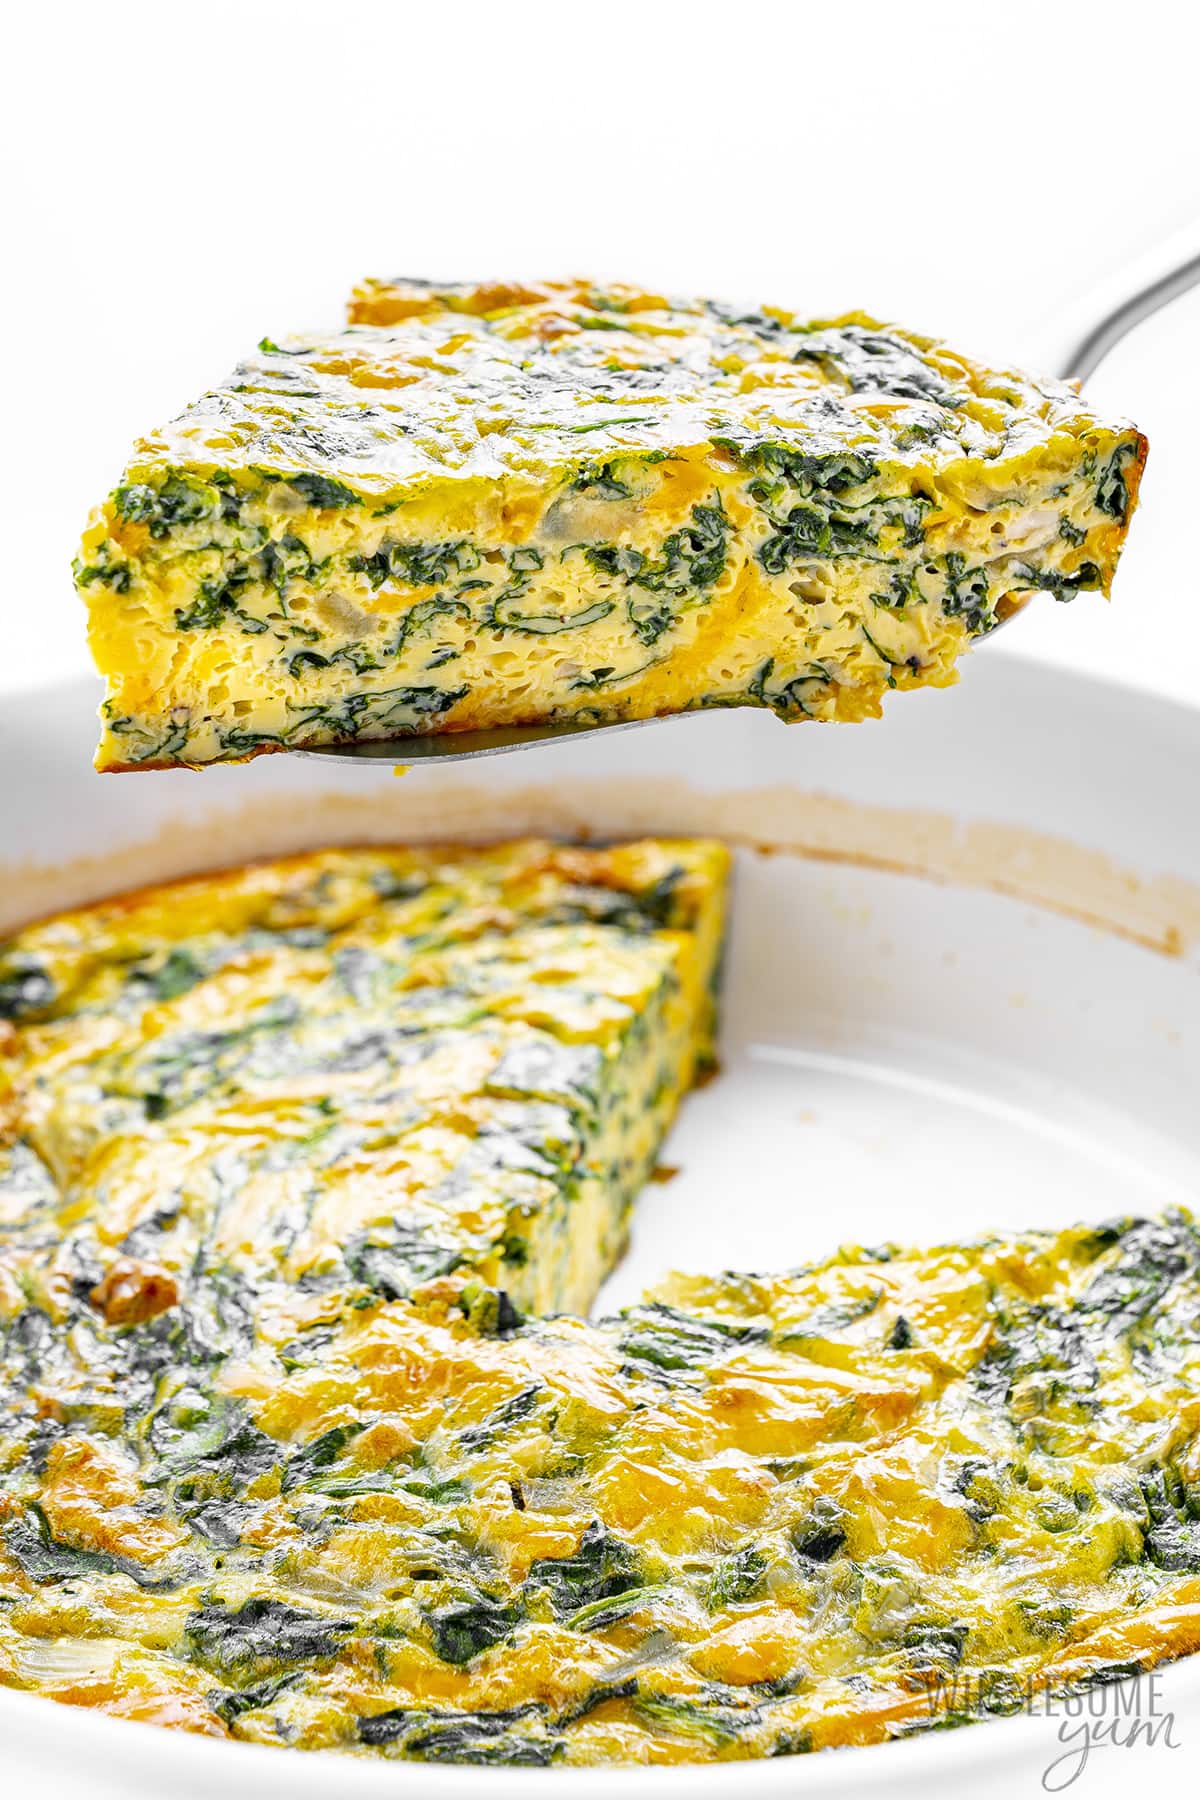 Slice of spinach quiche removed from baking dish.